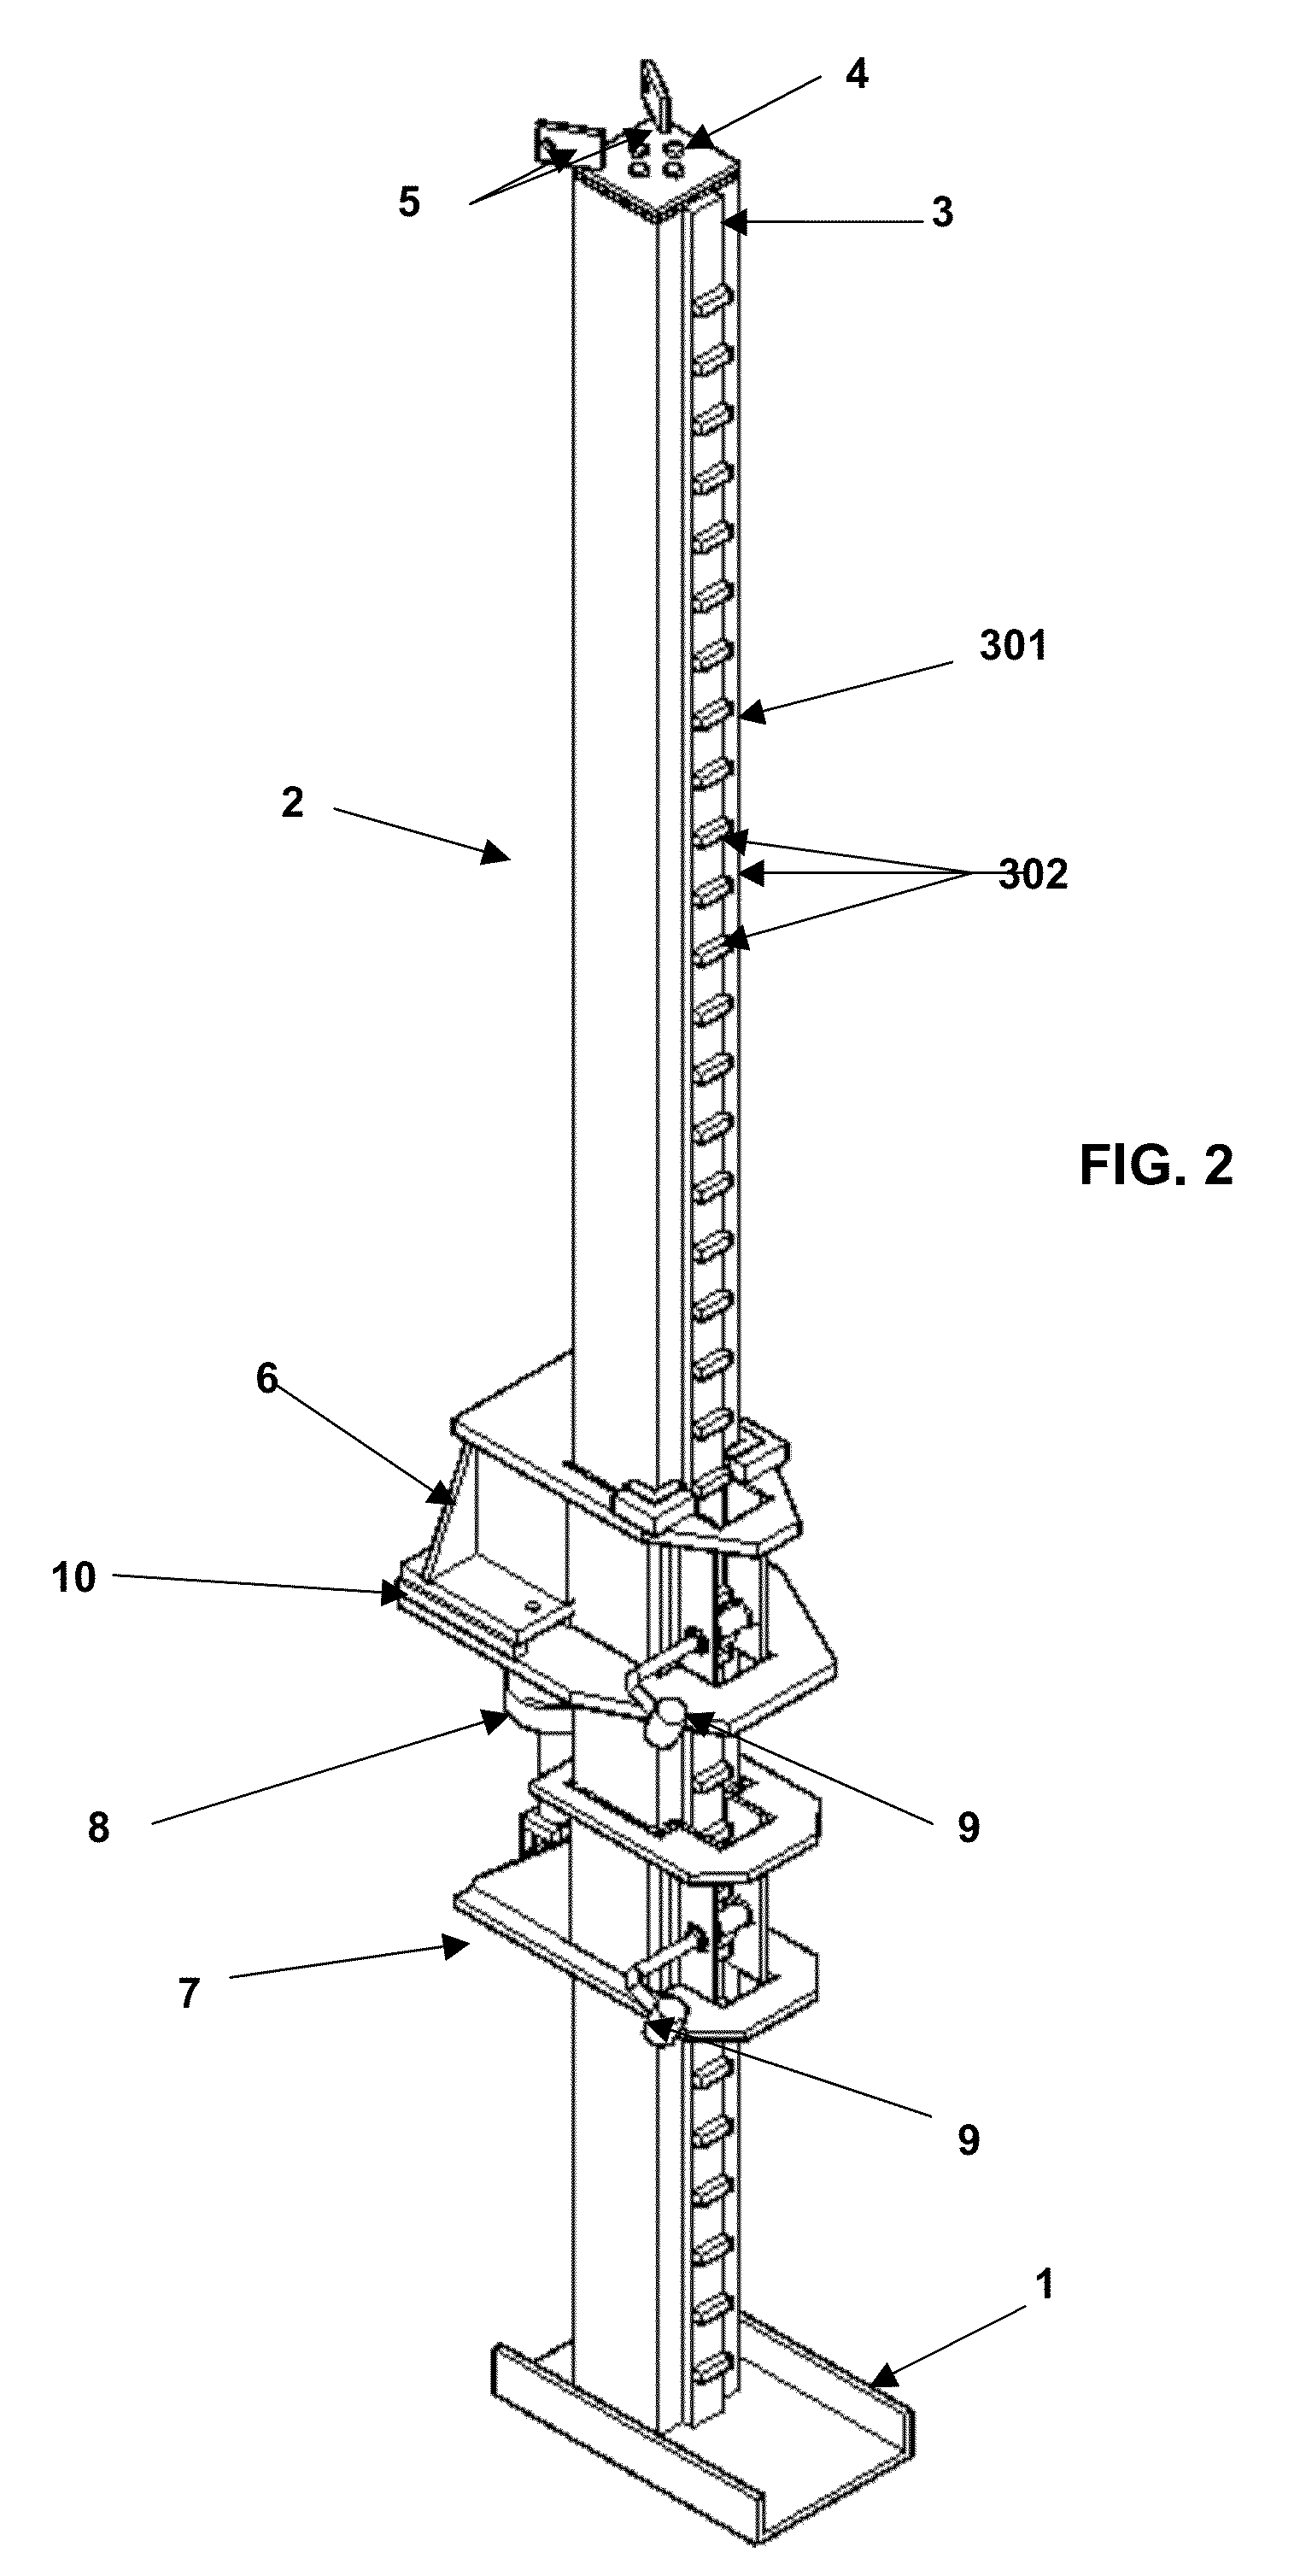 Collapsible hoisting device for use in the construction of large metal containers, and removable accessory applicable thereto